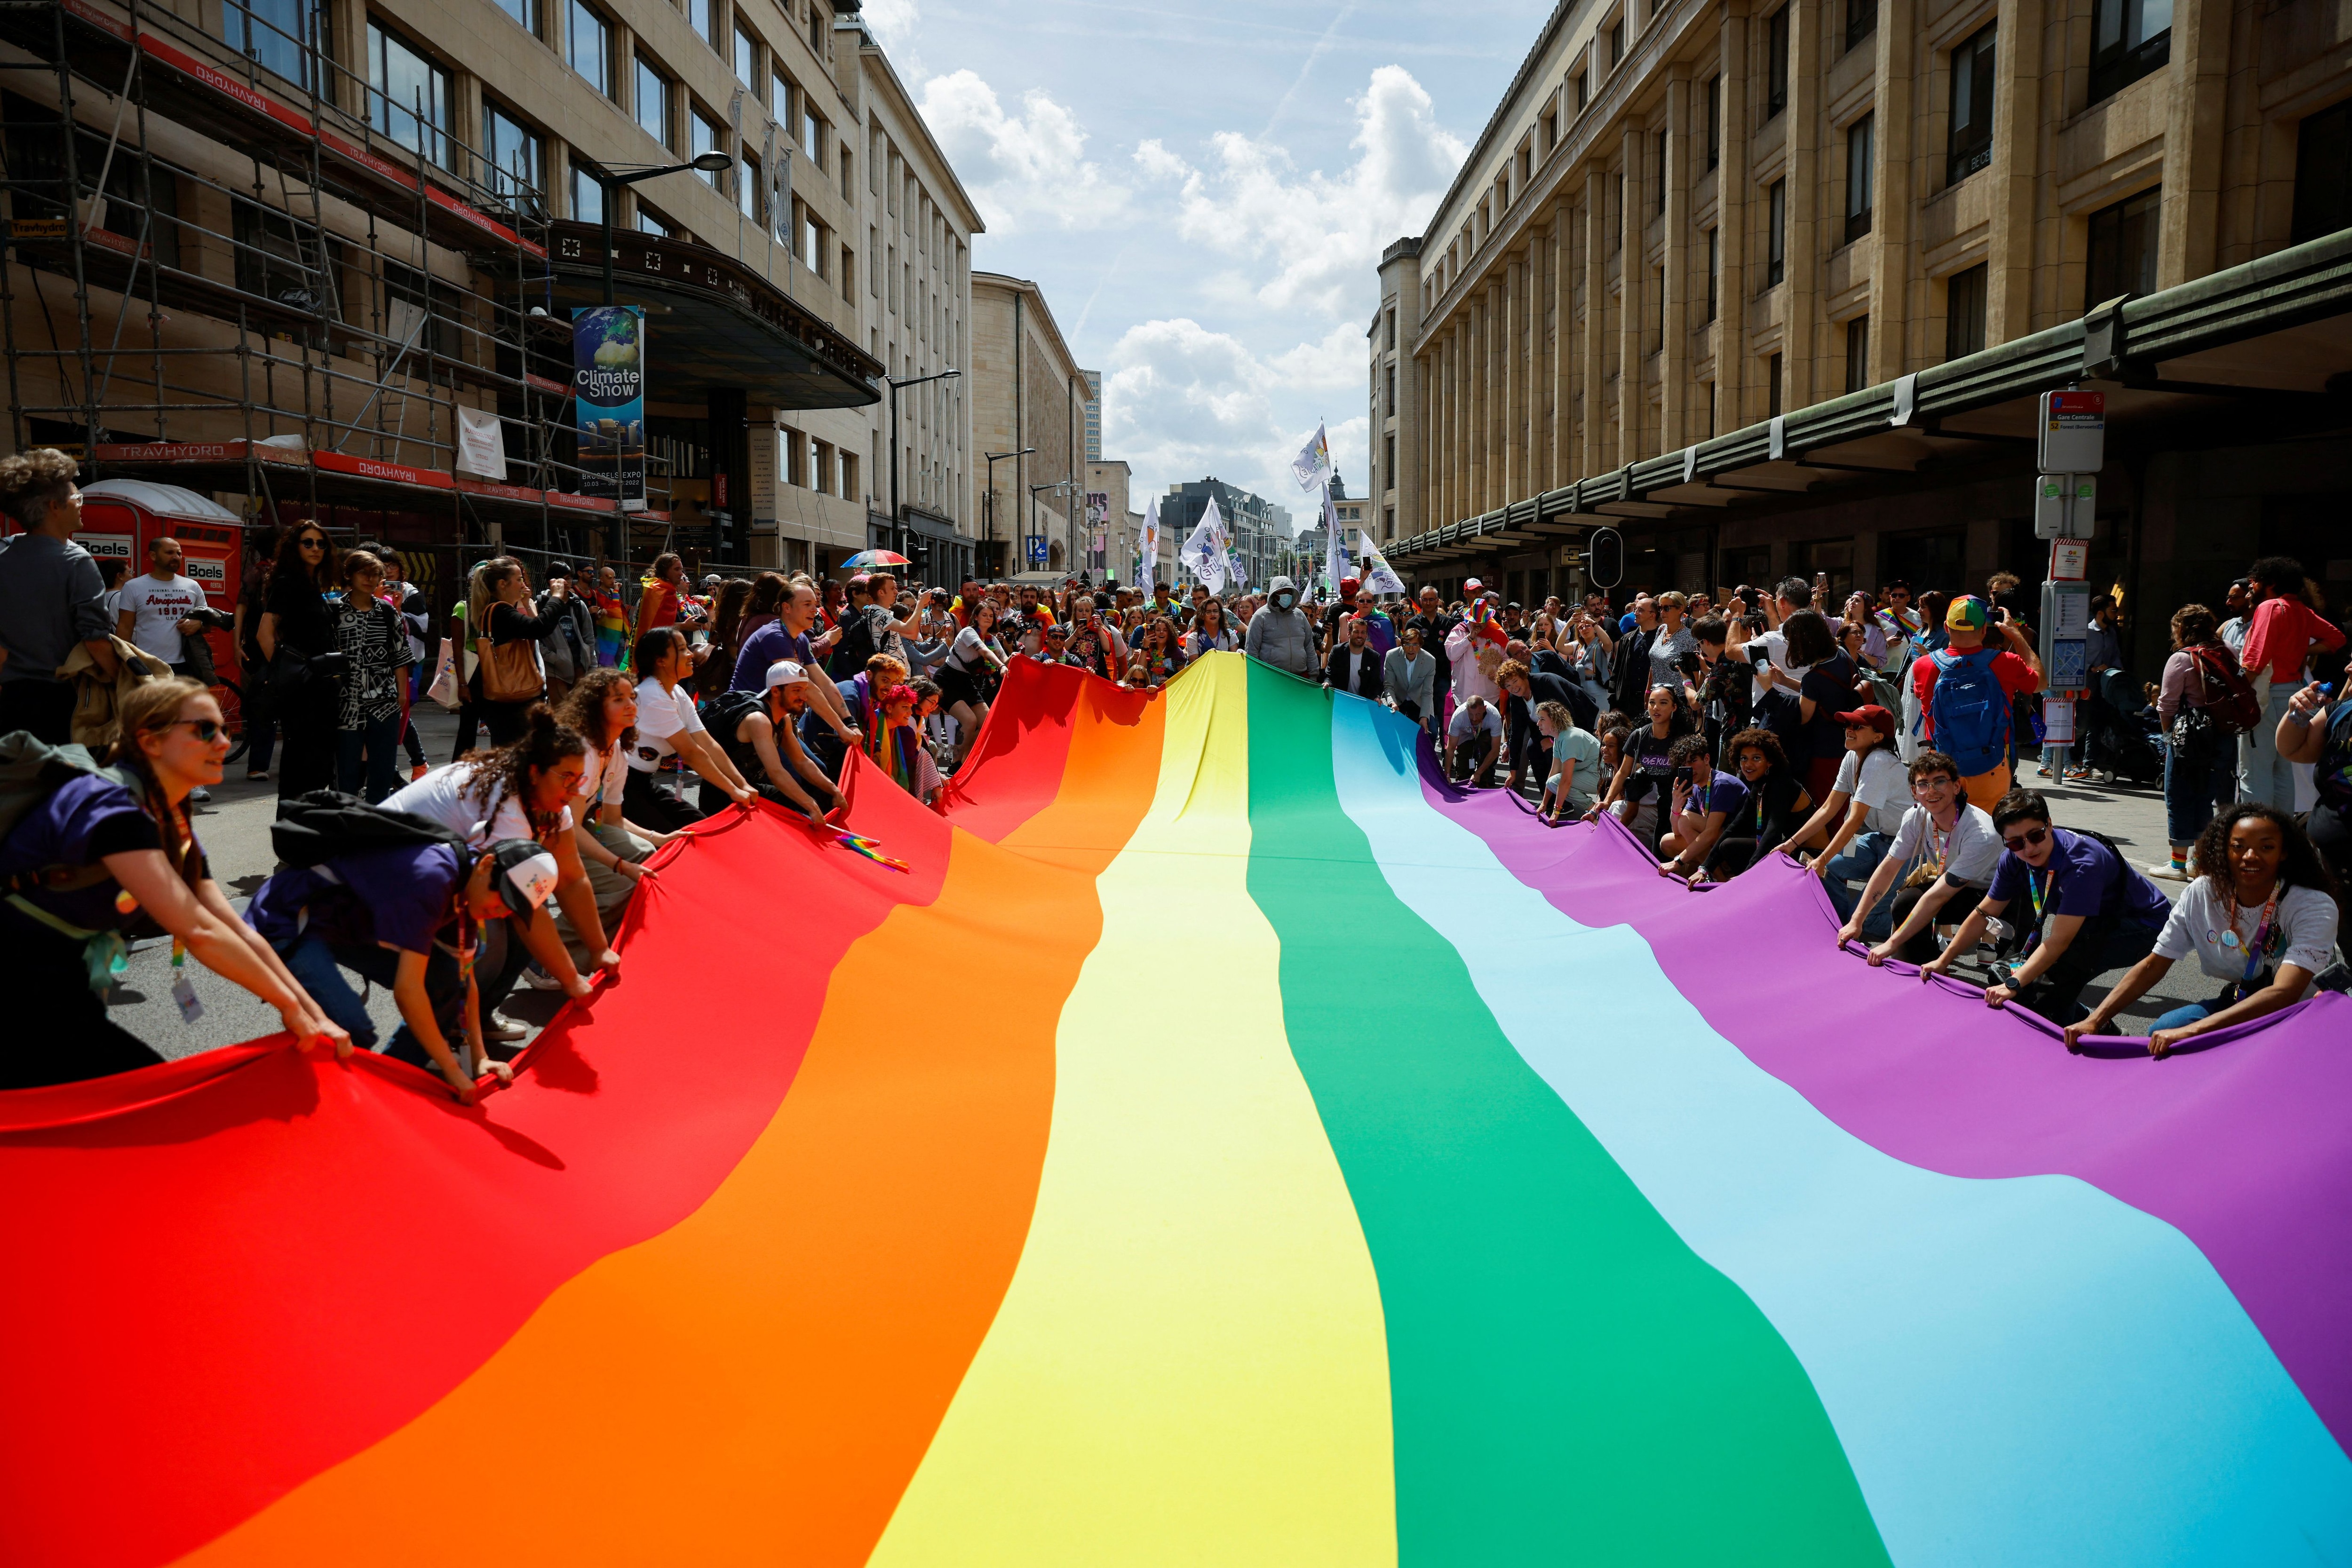 Participants unfold a rainbow flag during the annual Belgian LGBT Pride Parade in central Brussels, Belgium, May 21, 2022. REUTERS/Johanna Geron